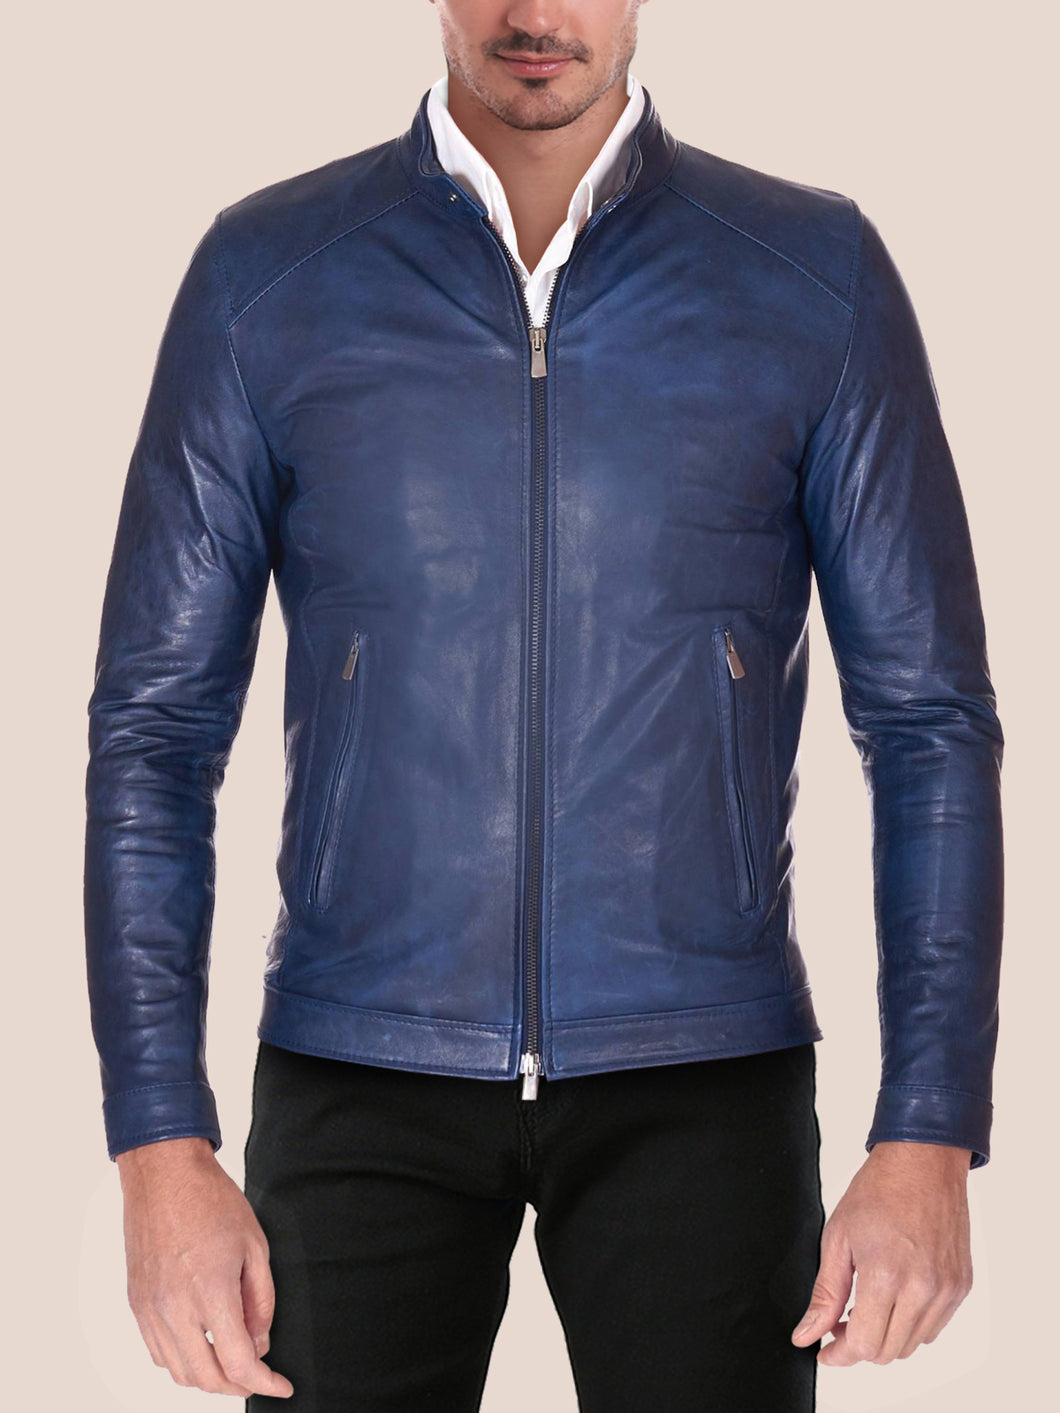 Mens Navy Leather Jacket Brand New